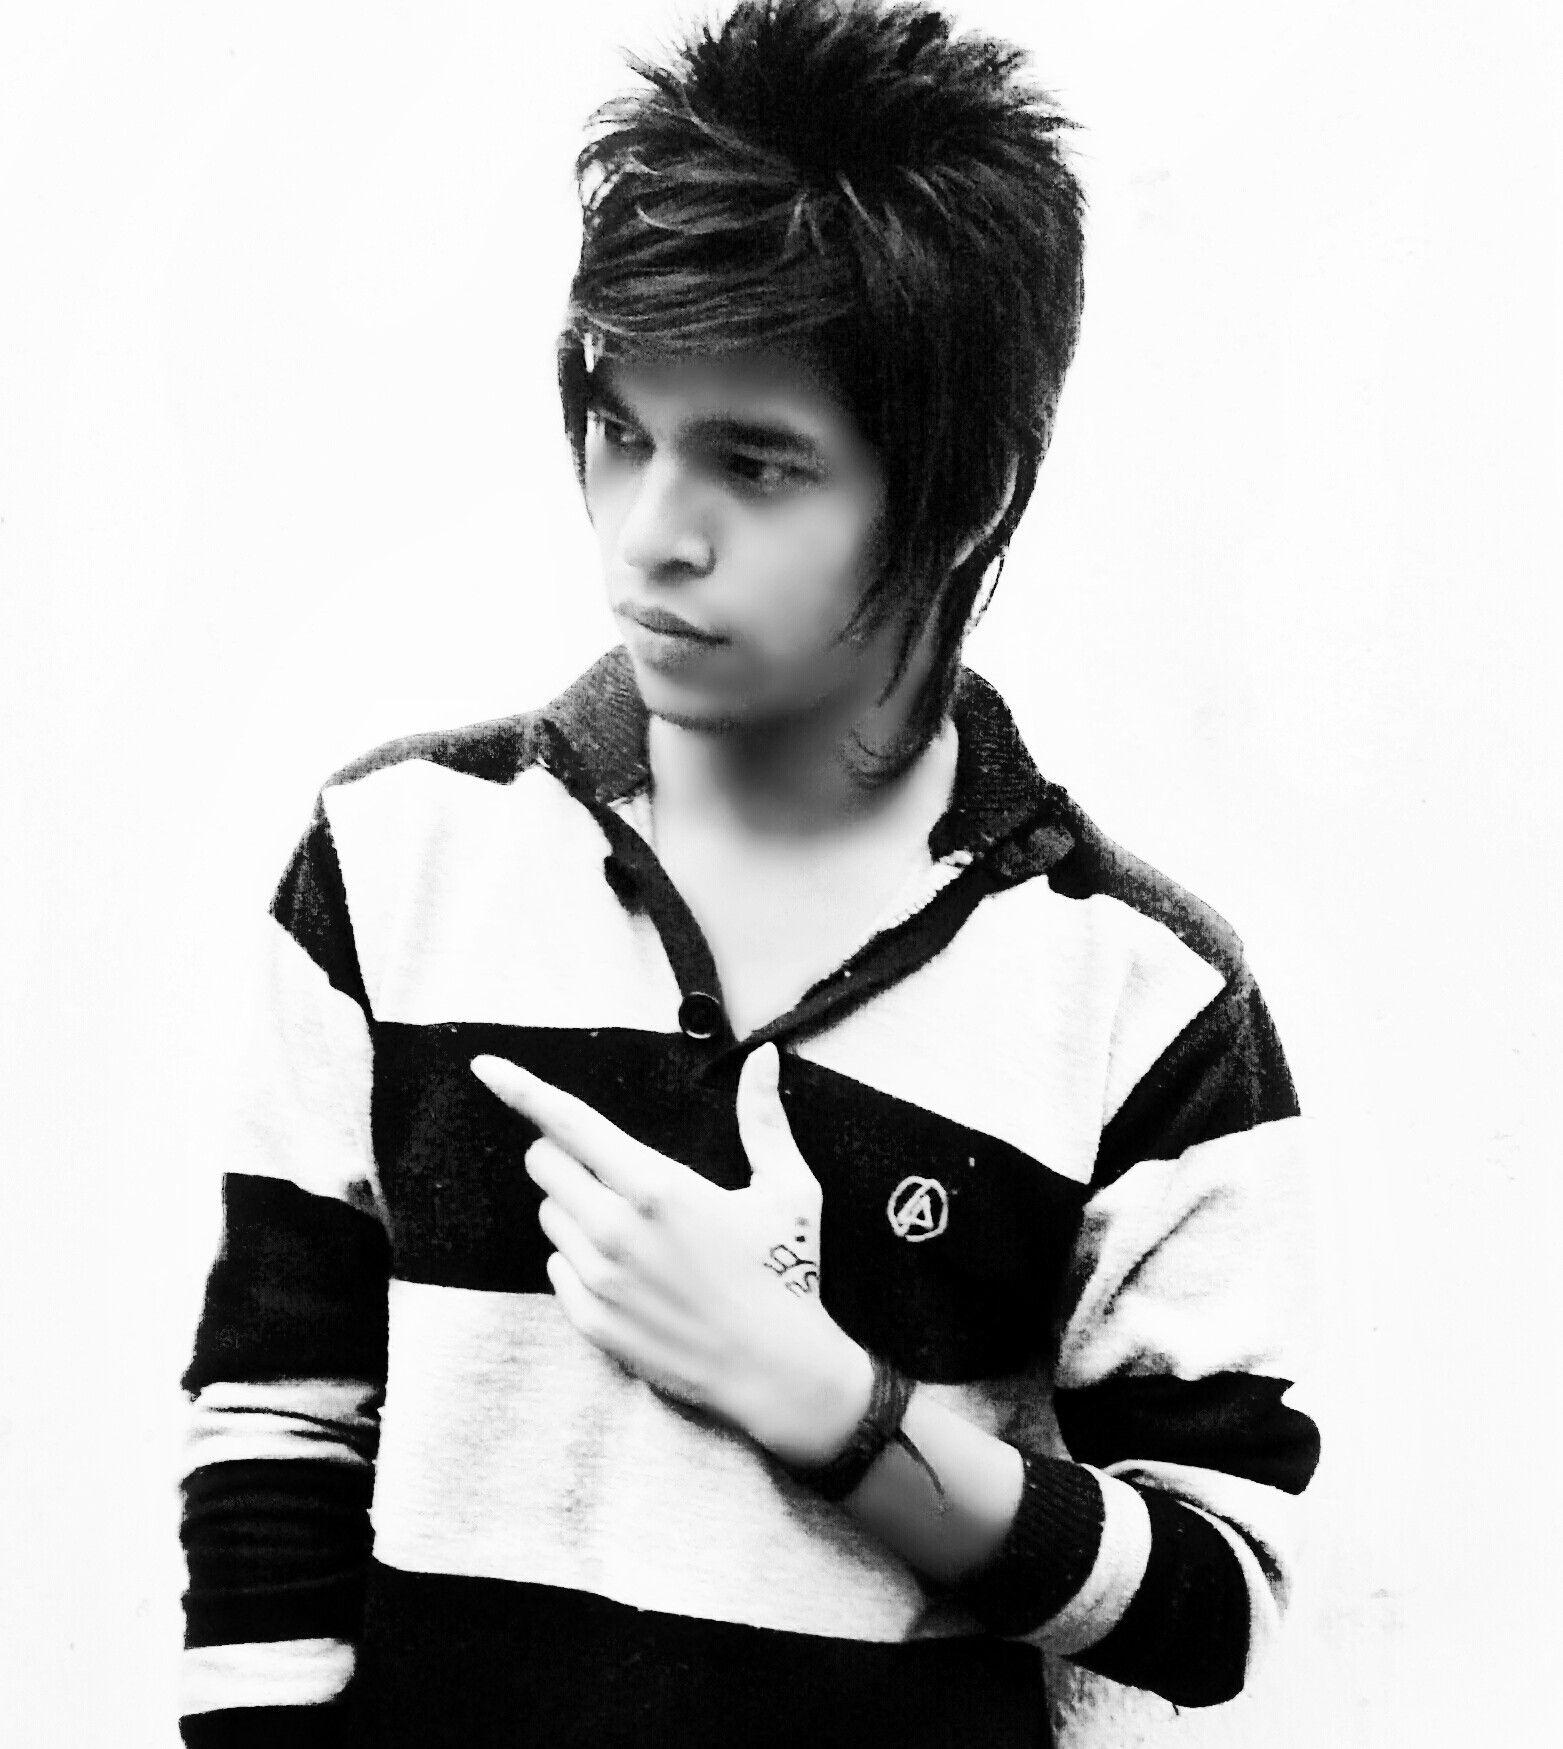 Amazing Emo And Only Love Boy HD Wallpaper Of Cute Guys With Black